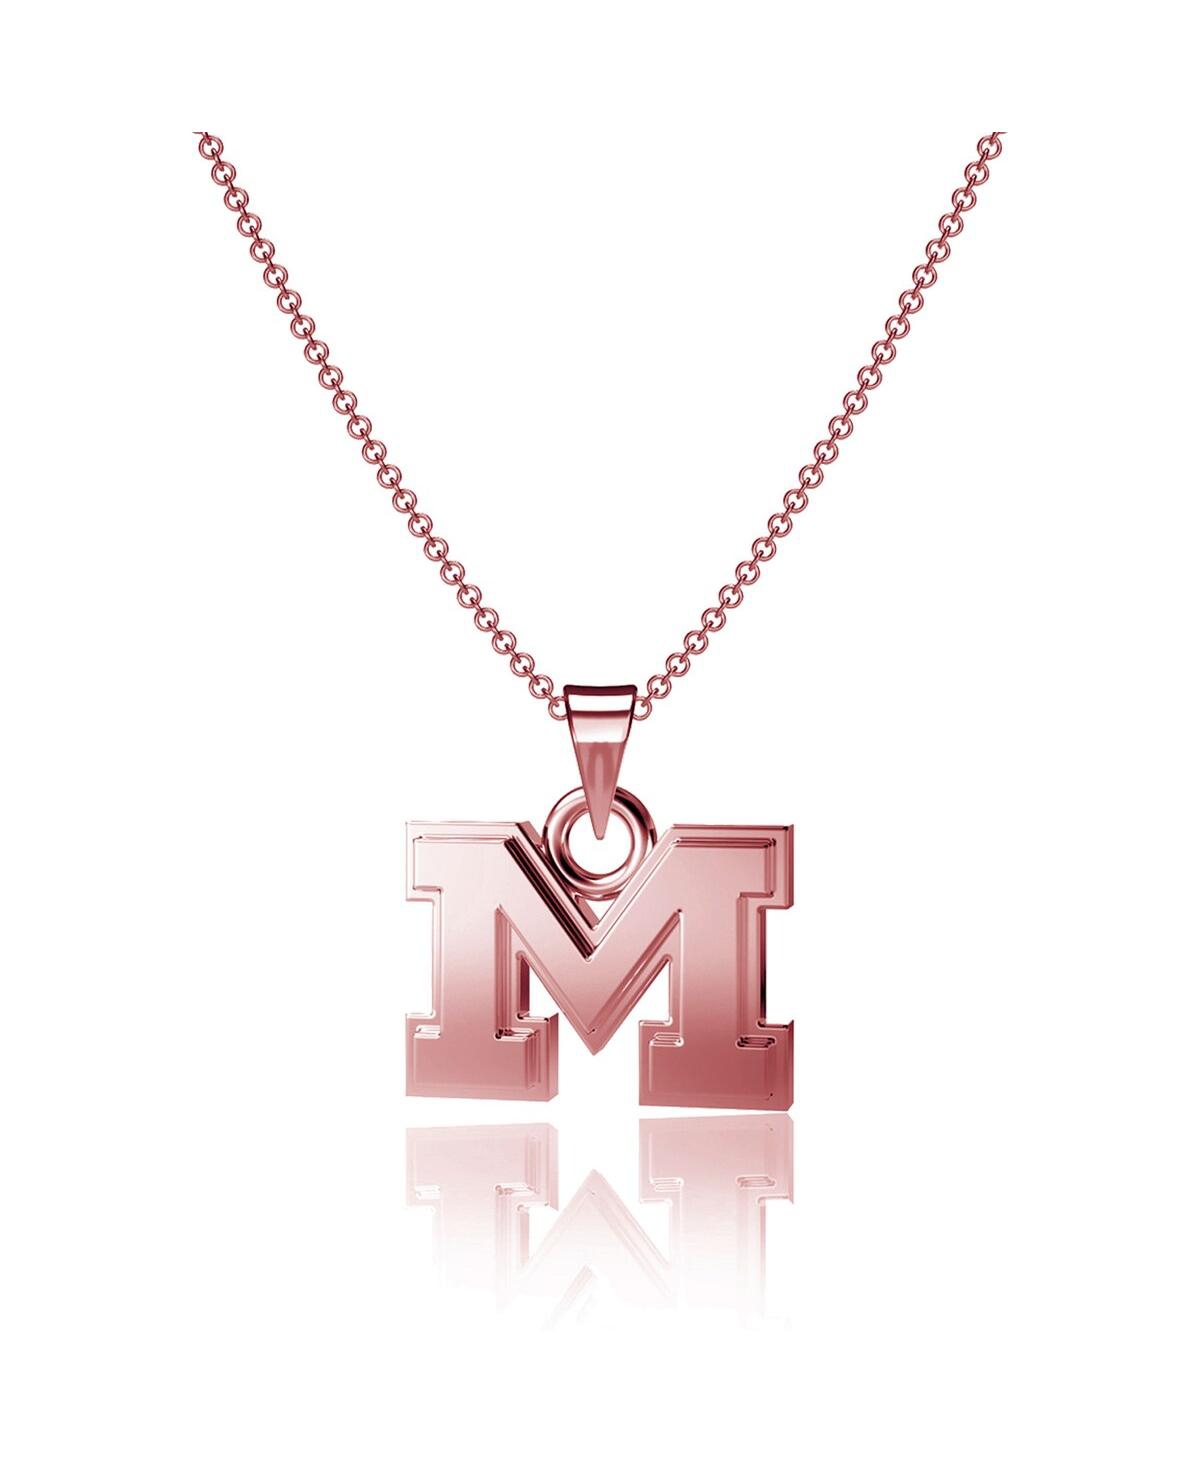 Dayna Designs Women's  Michigan Wolverines Rose Gold Pendant Necklace In Rose Gold-tone